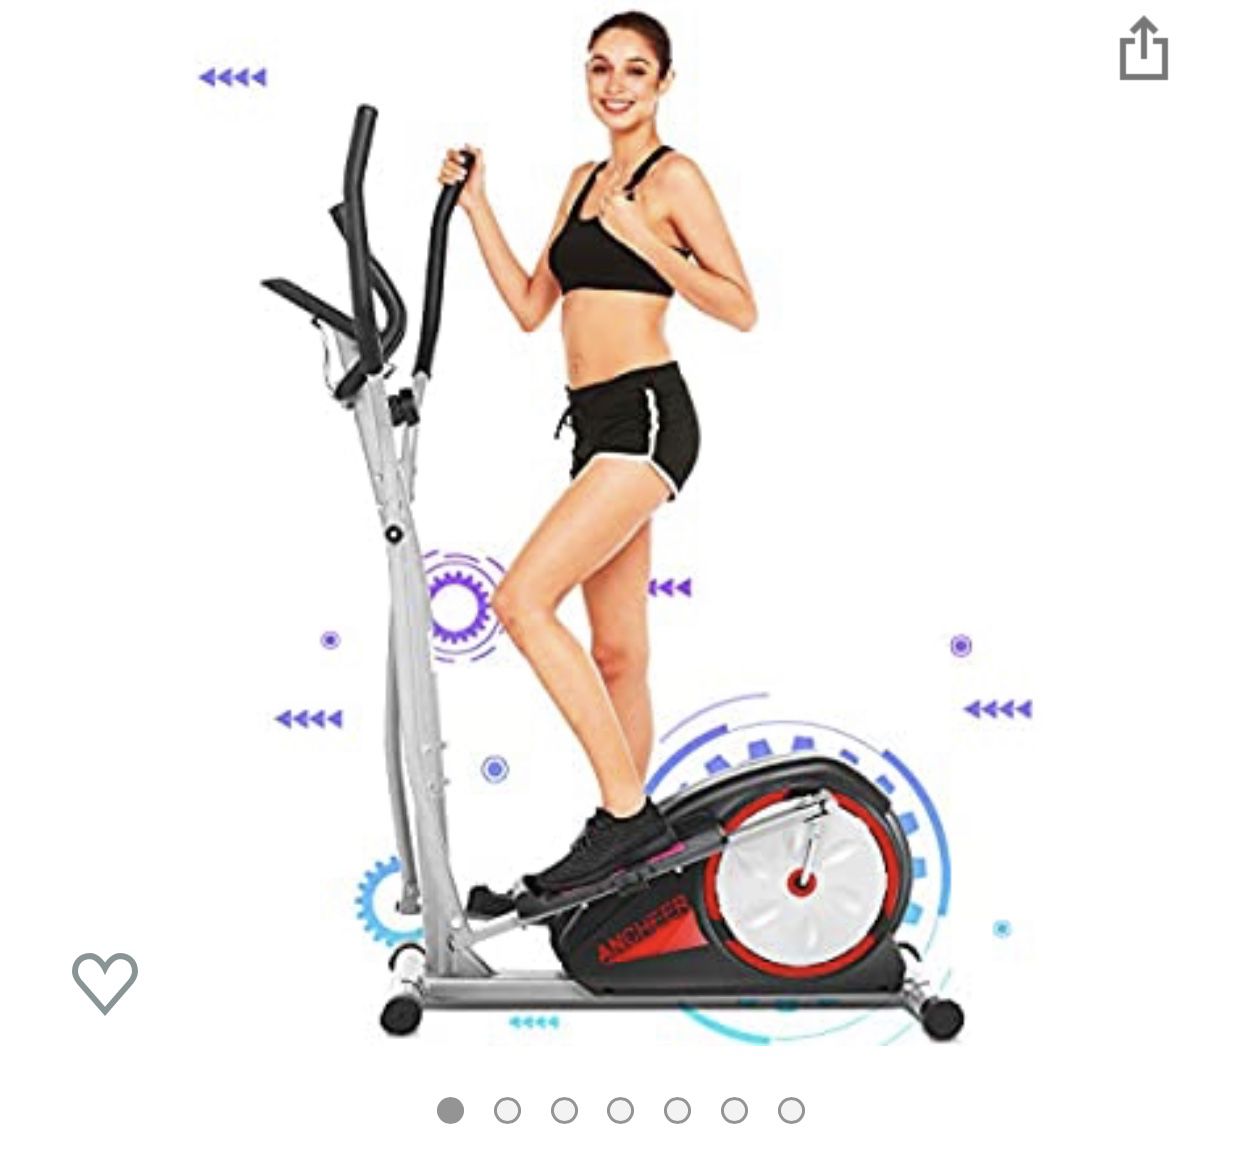 ANCHEER Elliptical Machine, Magnetic Elliptical Exercise Training Machine with LCD Monitor